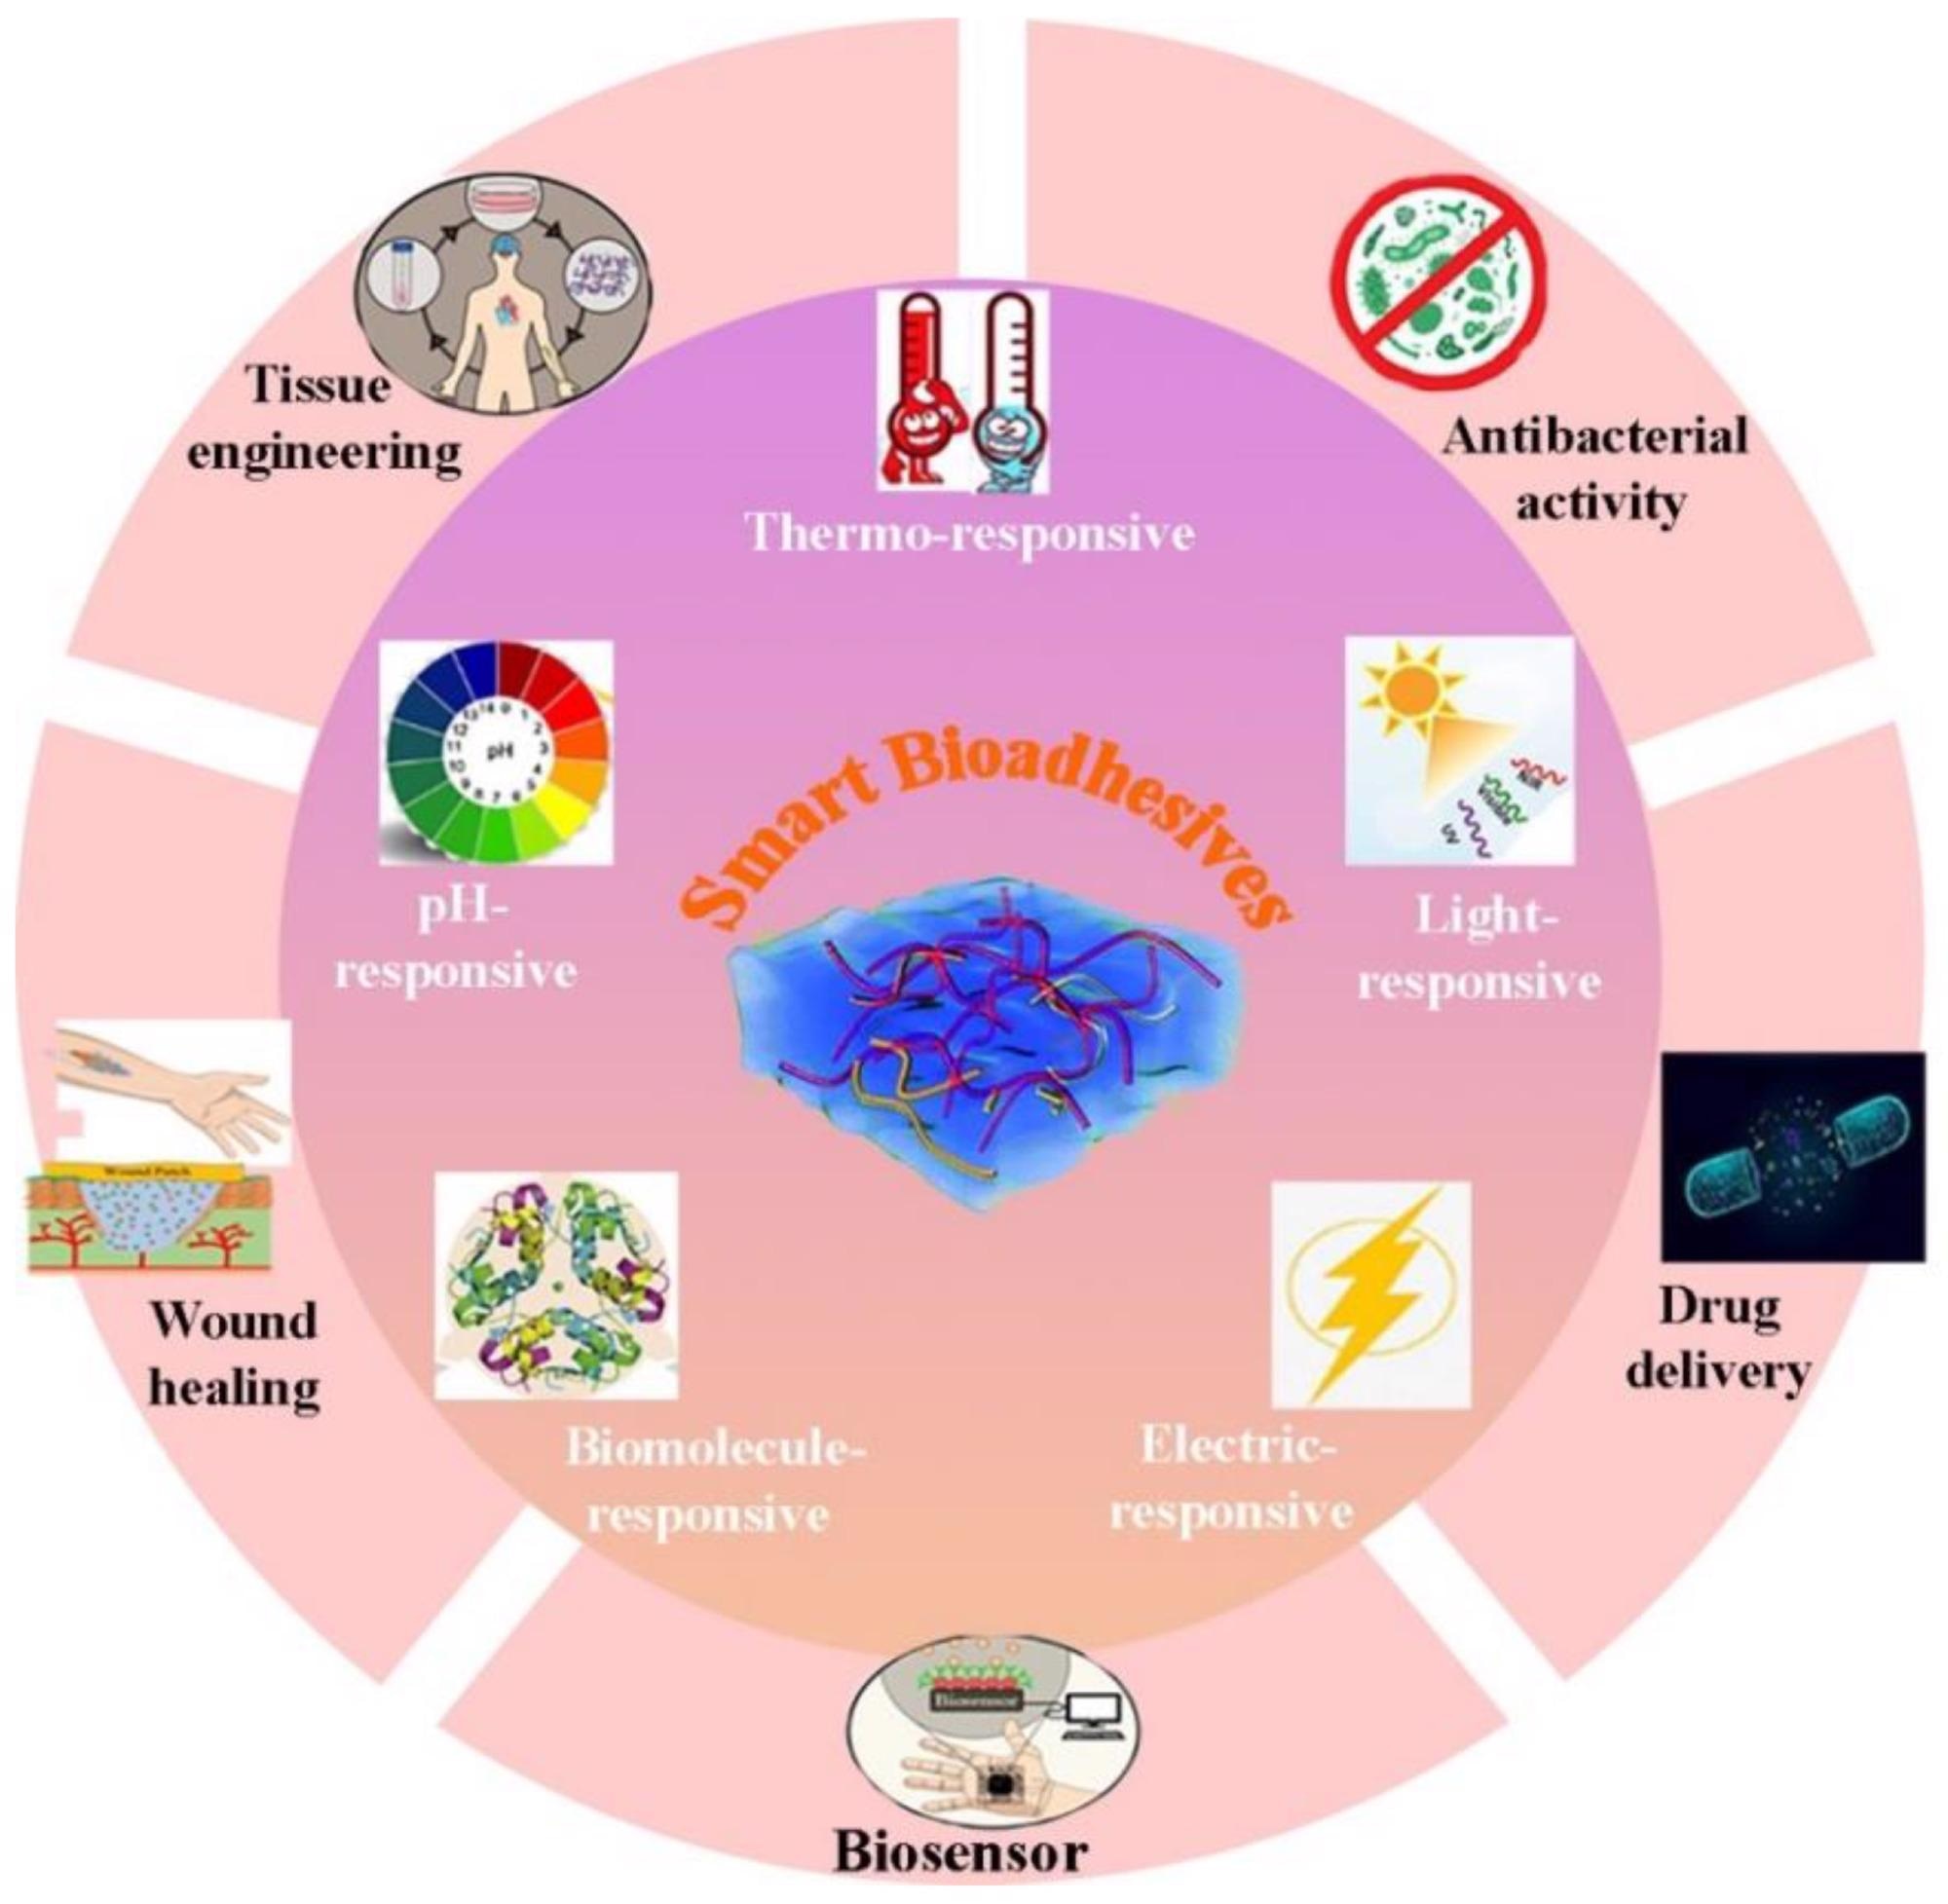 Schematic representation of various types of intelligent bioadhesives applied for different biomedical applications